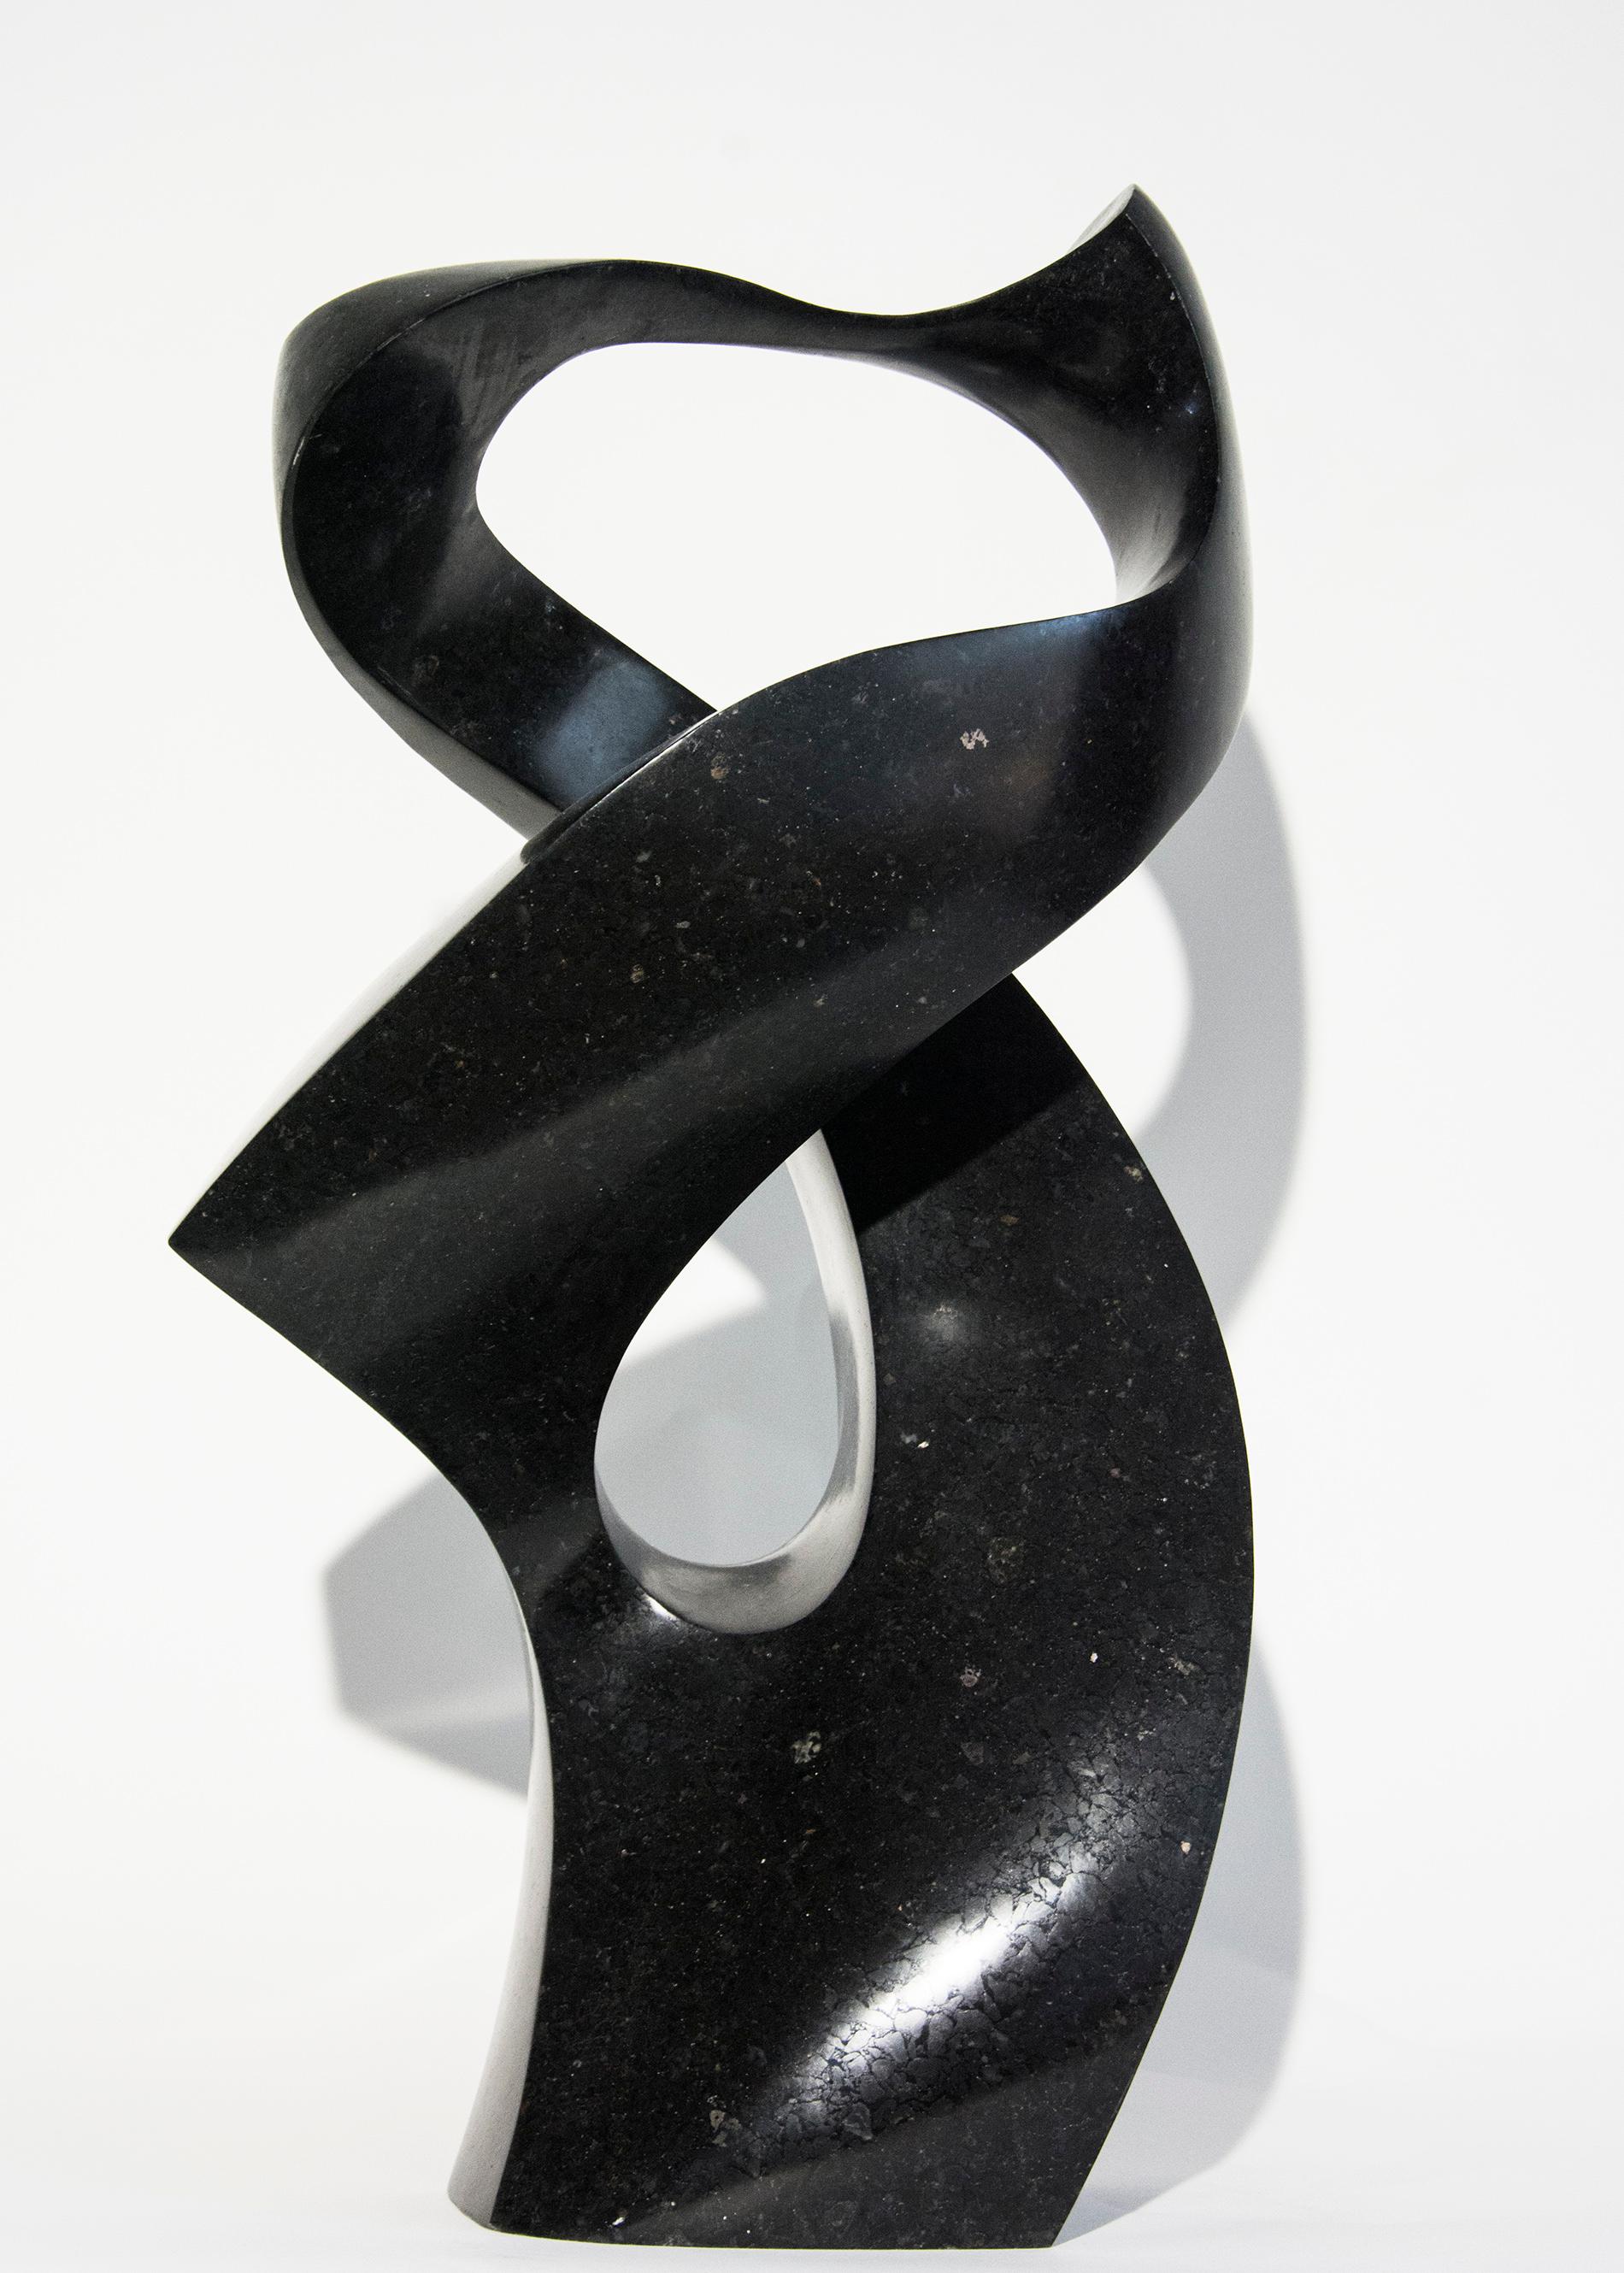 Jeremy Guy Abstract Sculpture - Embrace 2/50 - dark, smooth, polished, abstract, black granite sculpture